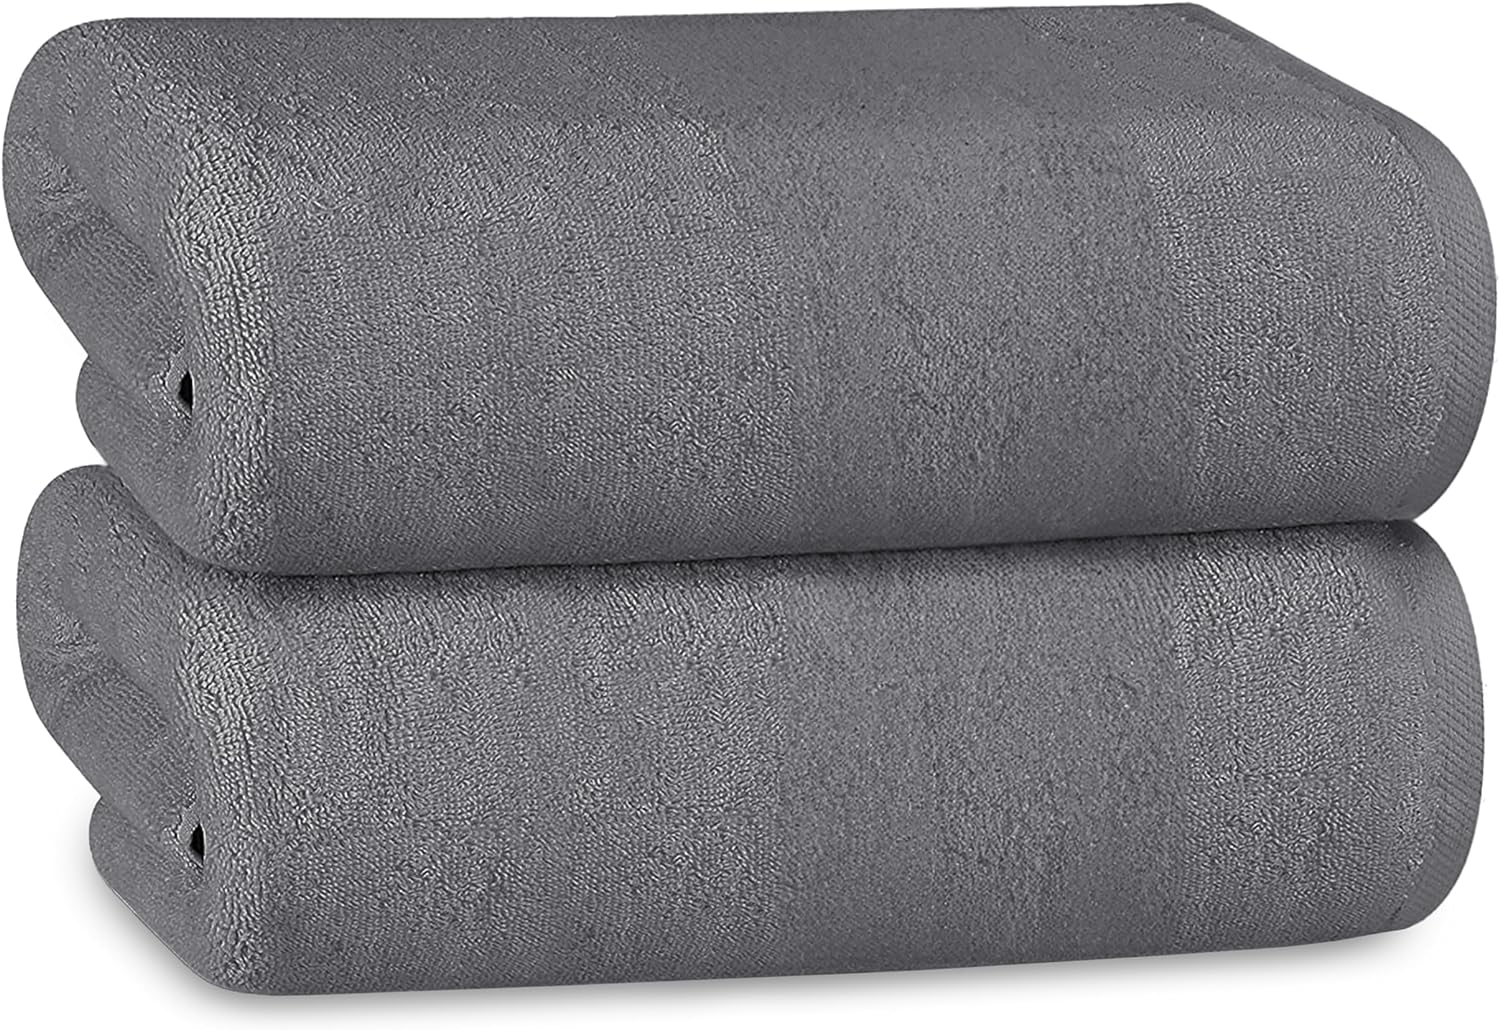 Hotel Collection Towels White Grey Hospitality Commercial Towels 2 PK BATH SHEET / GREY OLIVIA ROCCO Towel